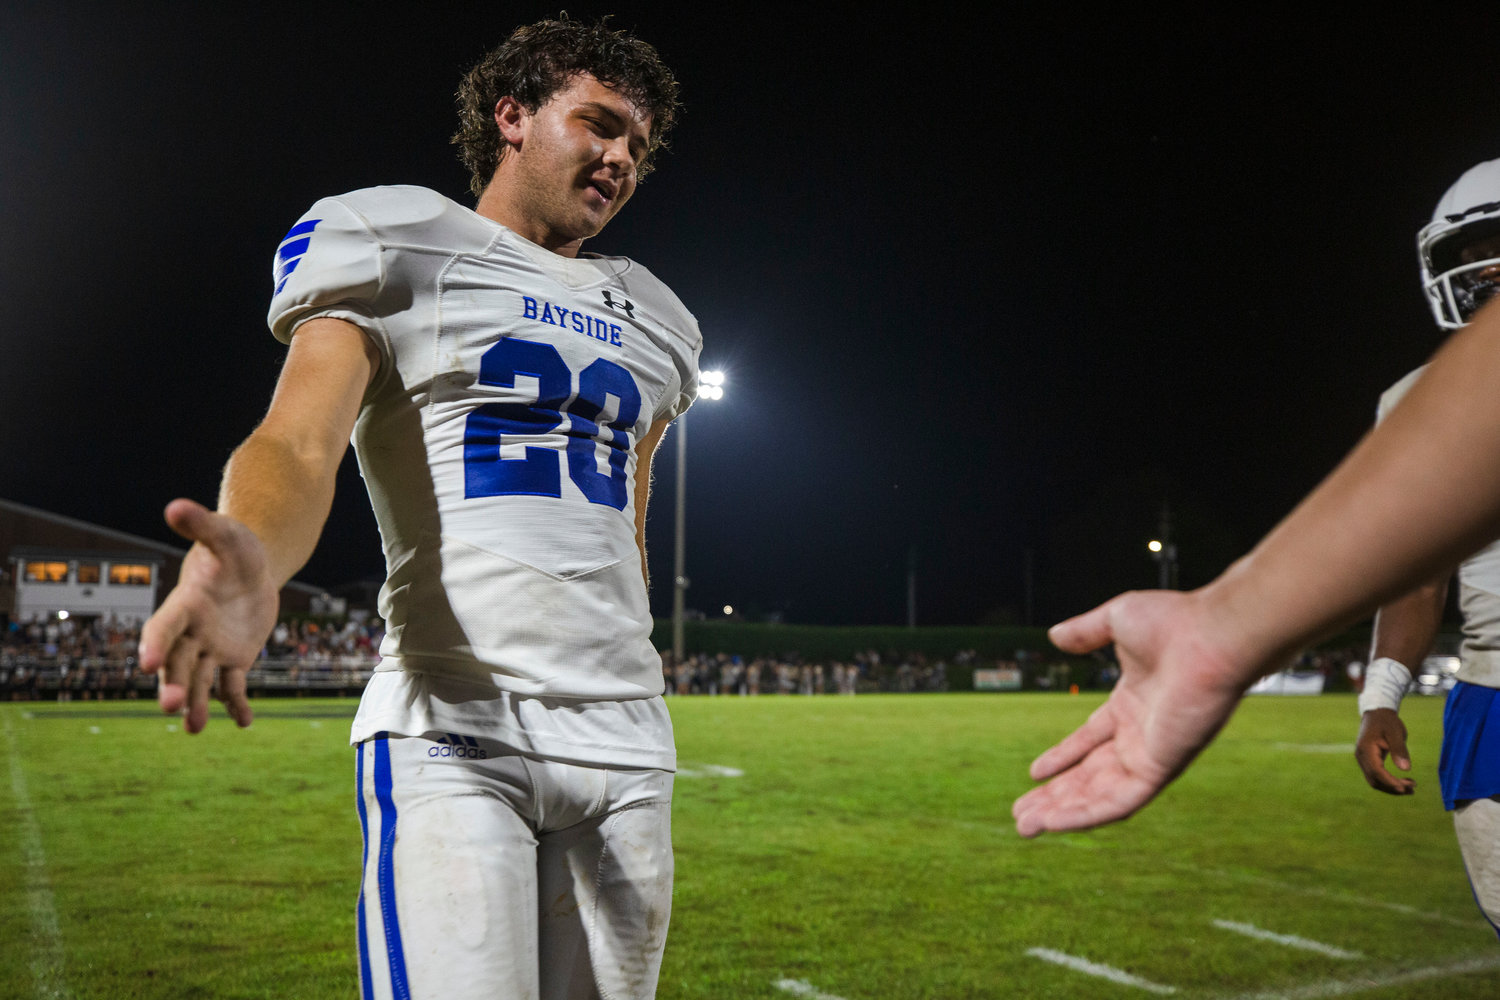 Bayside Academy’s Joey Jones gets acknowledged on the sideline after the Admirals’ season-opening game against the Elberta Warriors on the road Aug. 19. Jones was a second-team all-state selection as a placekicker after he helped Bayside Academy to a fourth straight playoff berth.